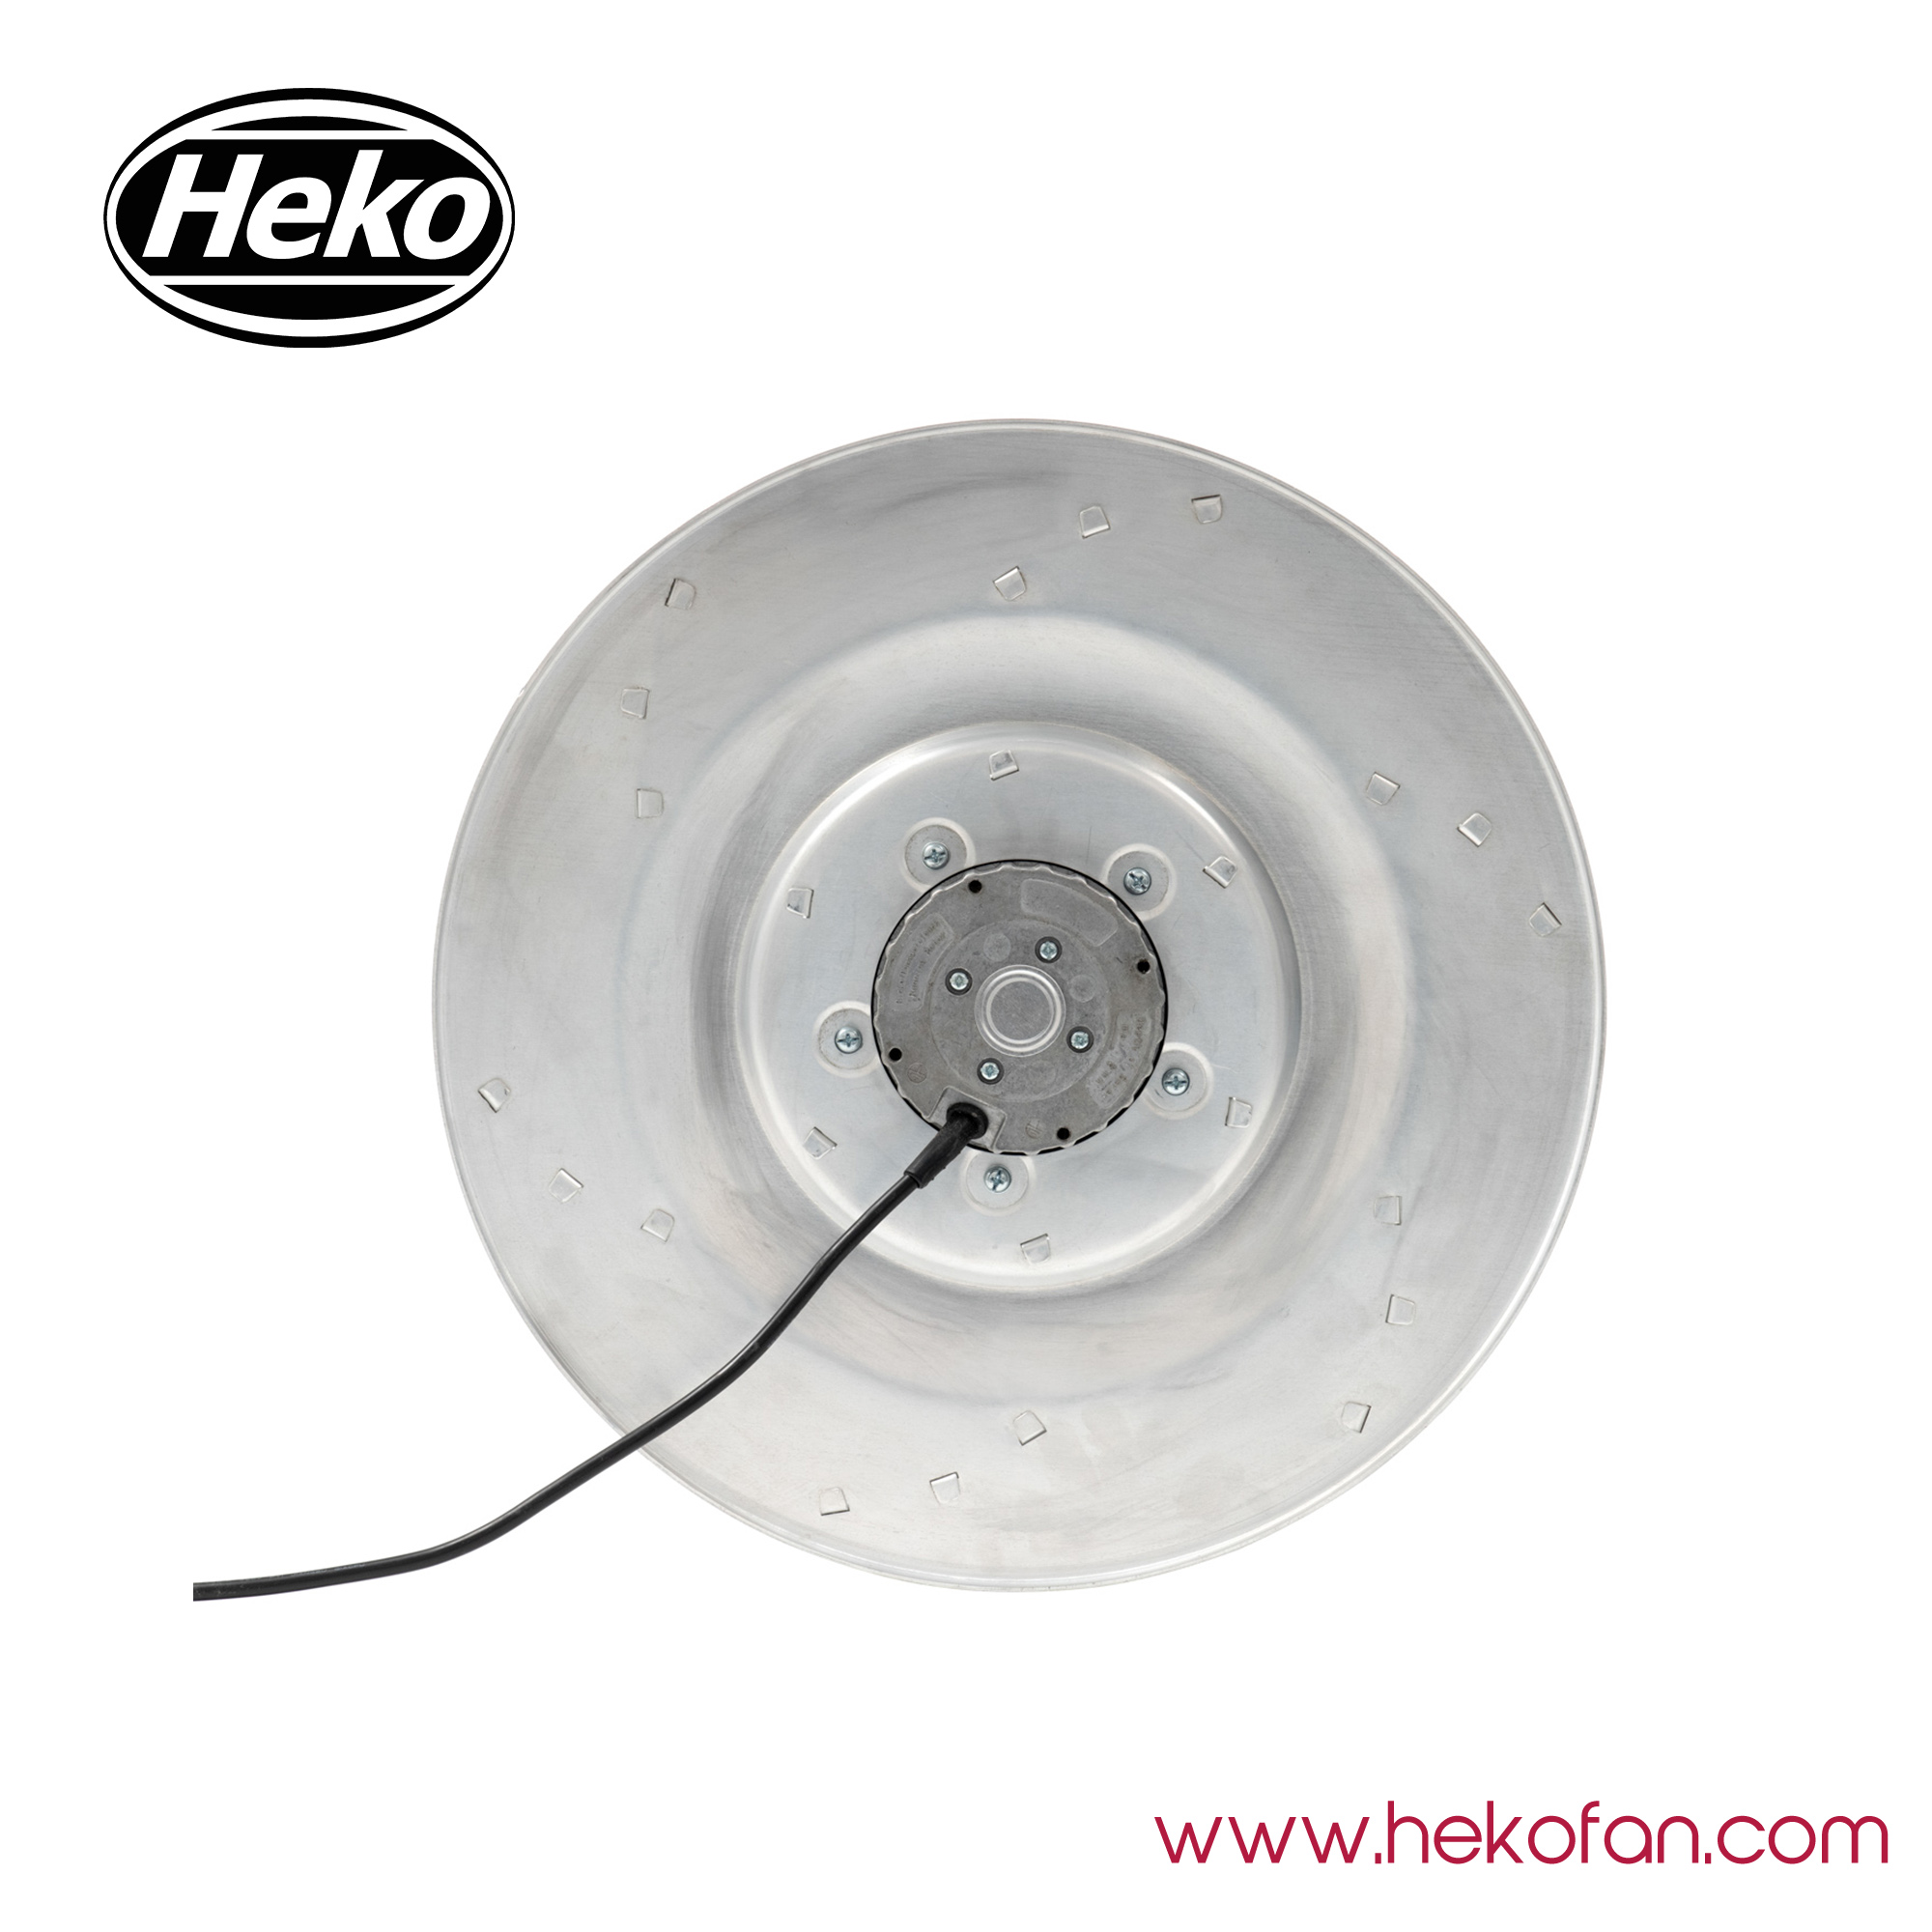 HEKO DC400mm Cabinet Centrifugal Extractor Fan